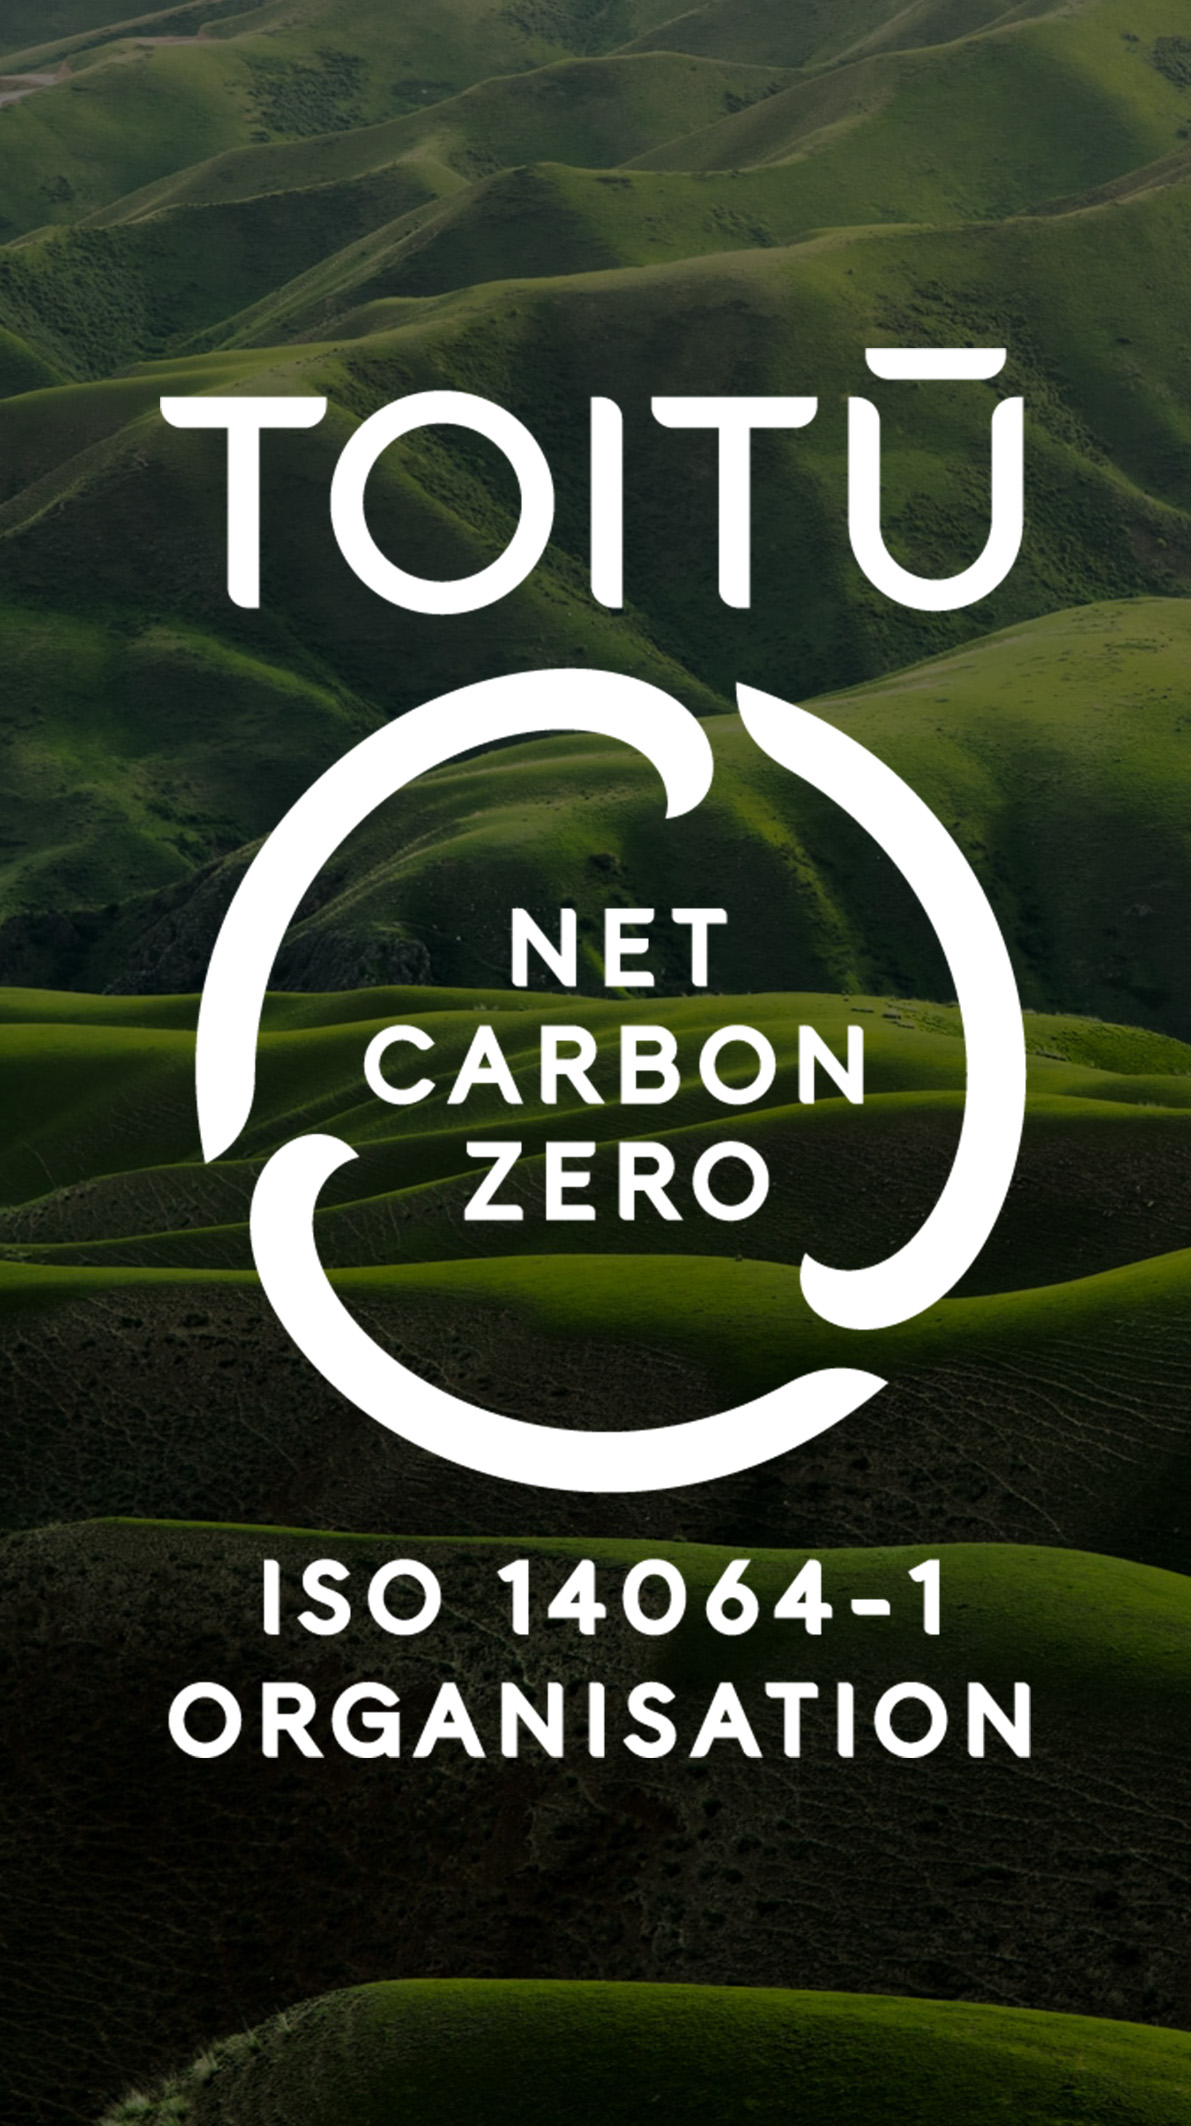 Black Box Power is now a Toitū net carbonzero certified business. 